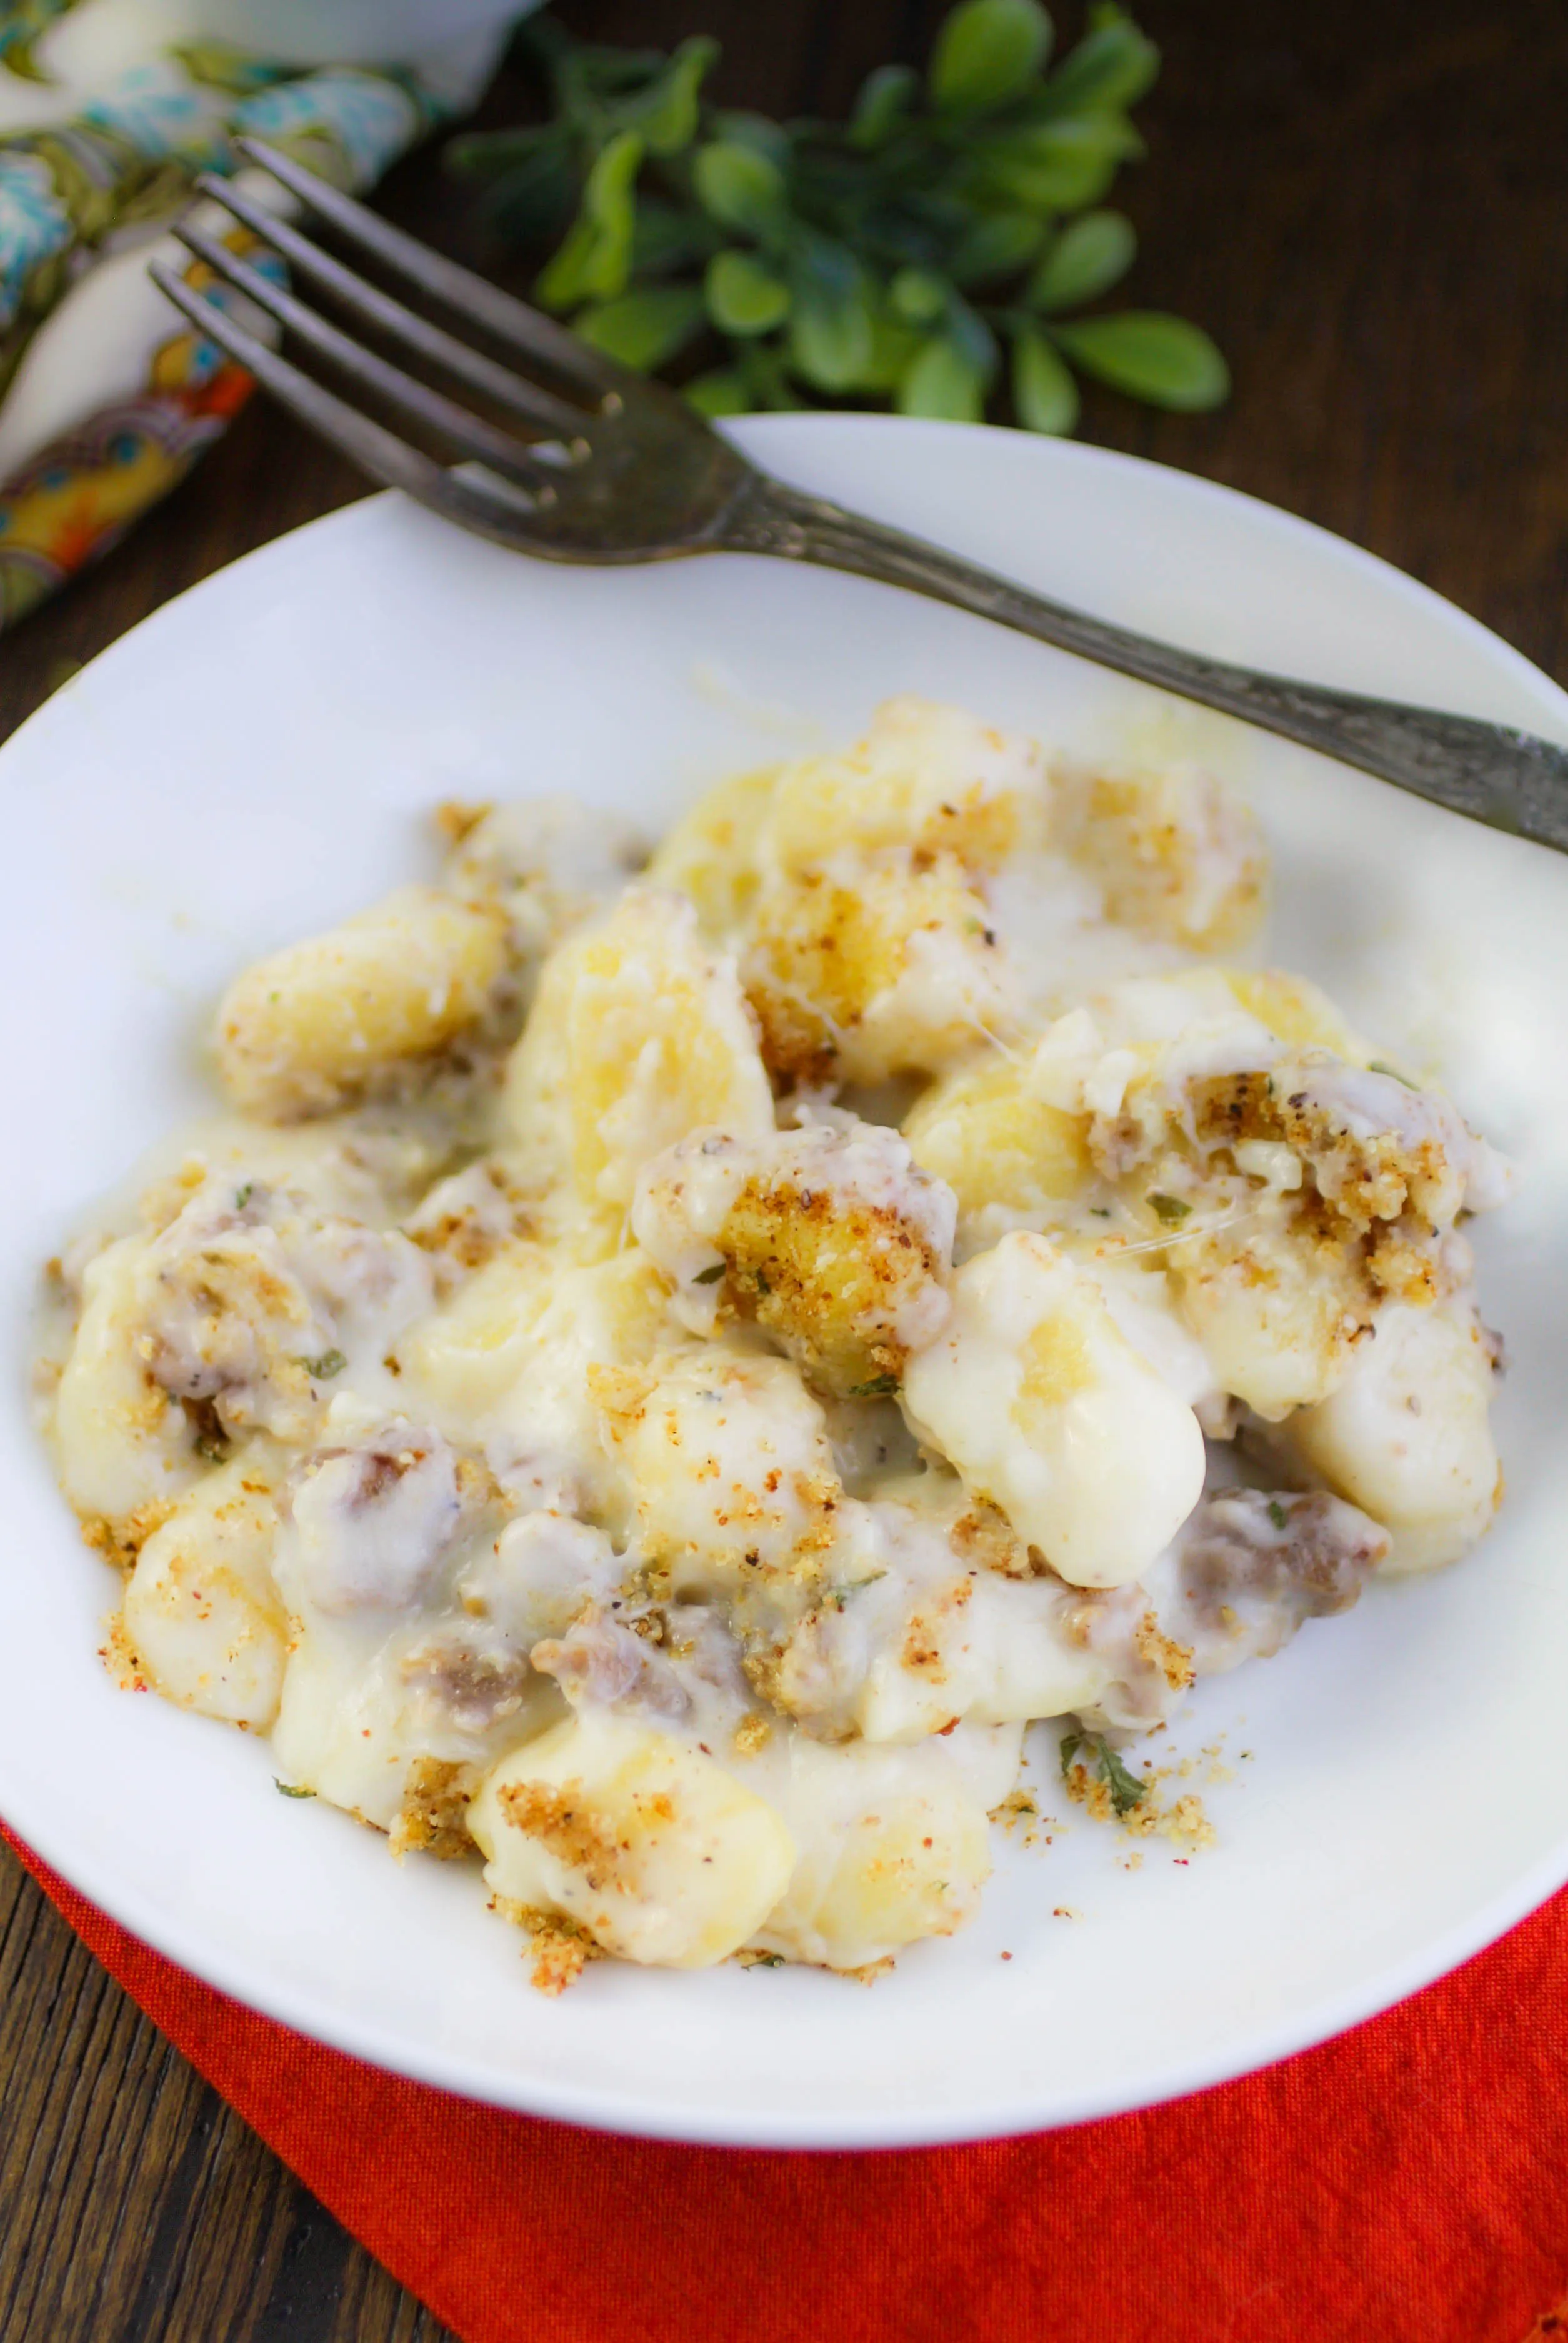 Creamy Sausage Gnocchi & Cheese is a filling and rich dish you'll love. Creamy Sausage Gnocchi & Cheese is easy to make for a special meal.